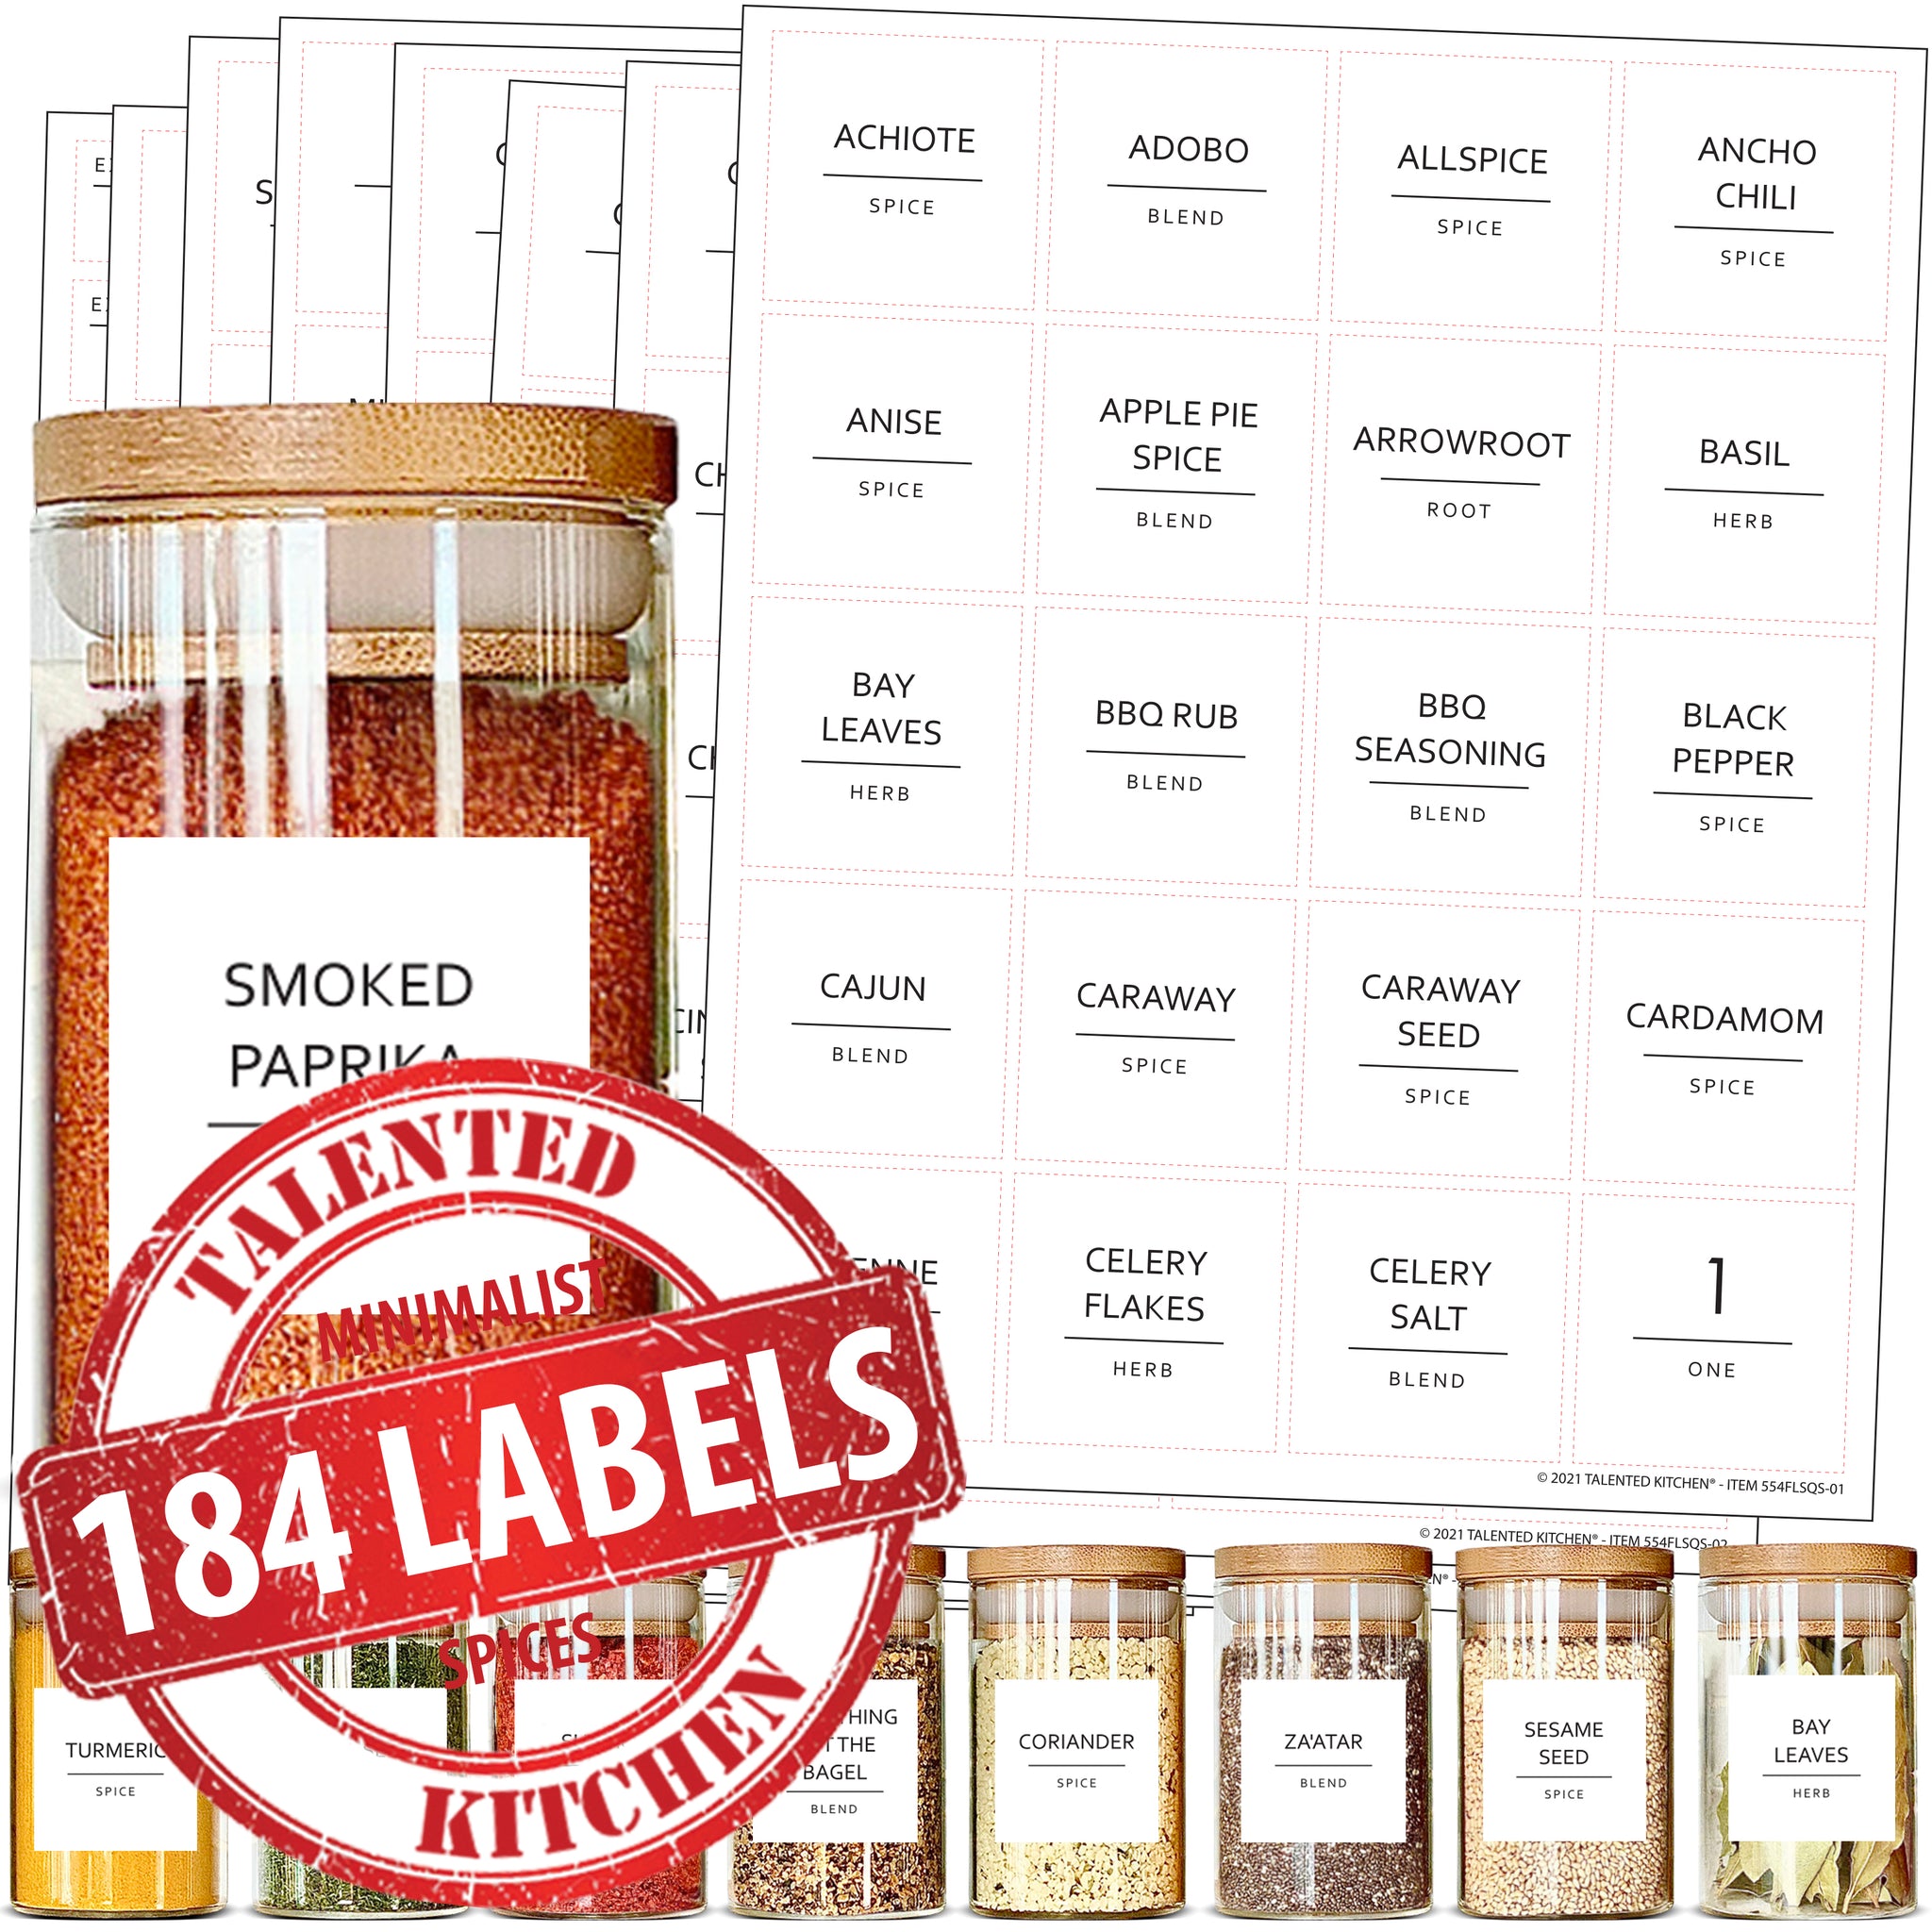 Talented Kitchen 125 Spice Labels Stickers, Clear Spice Jar Labels  Preprinted for Seasoning Herbs, Kitchen Spice Rack Organization, Water  Resistant, Black